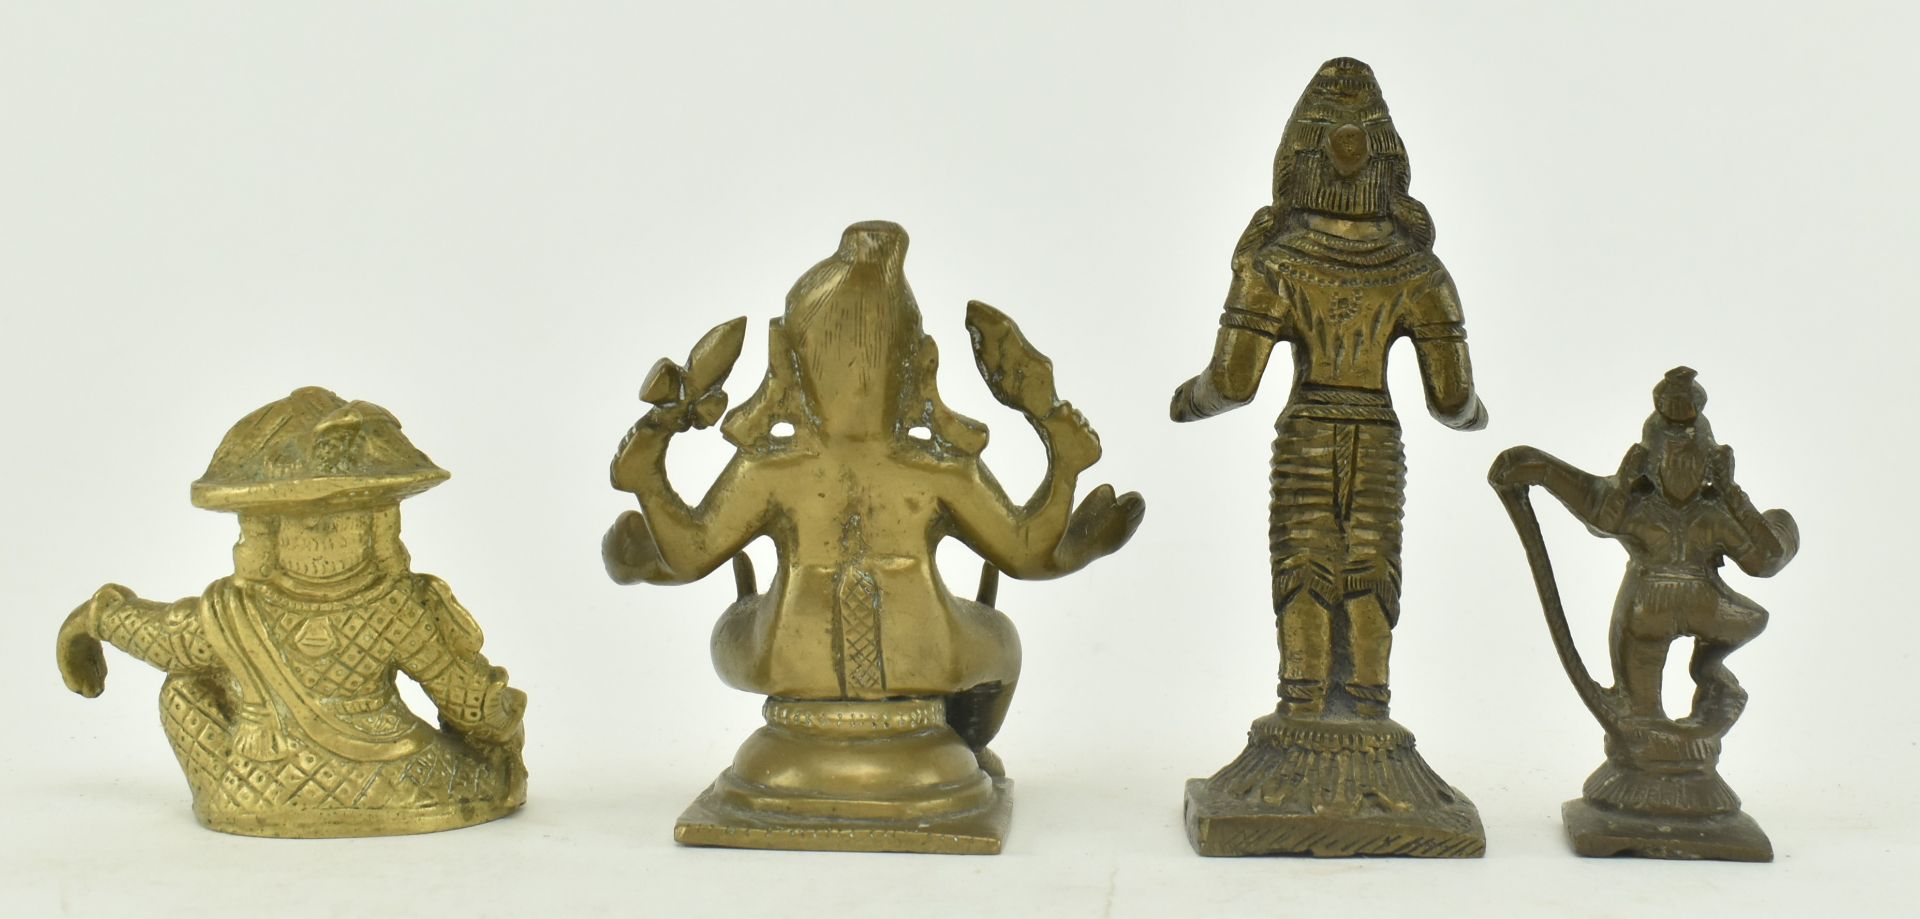 FOUR SOUTH EAST ASIAN AMULET STATUES OF HINDU DEITIES - Image 3 of 5